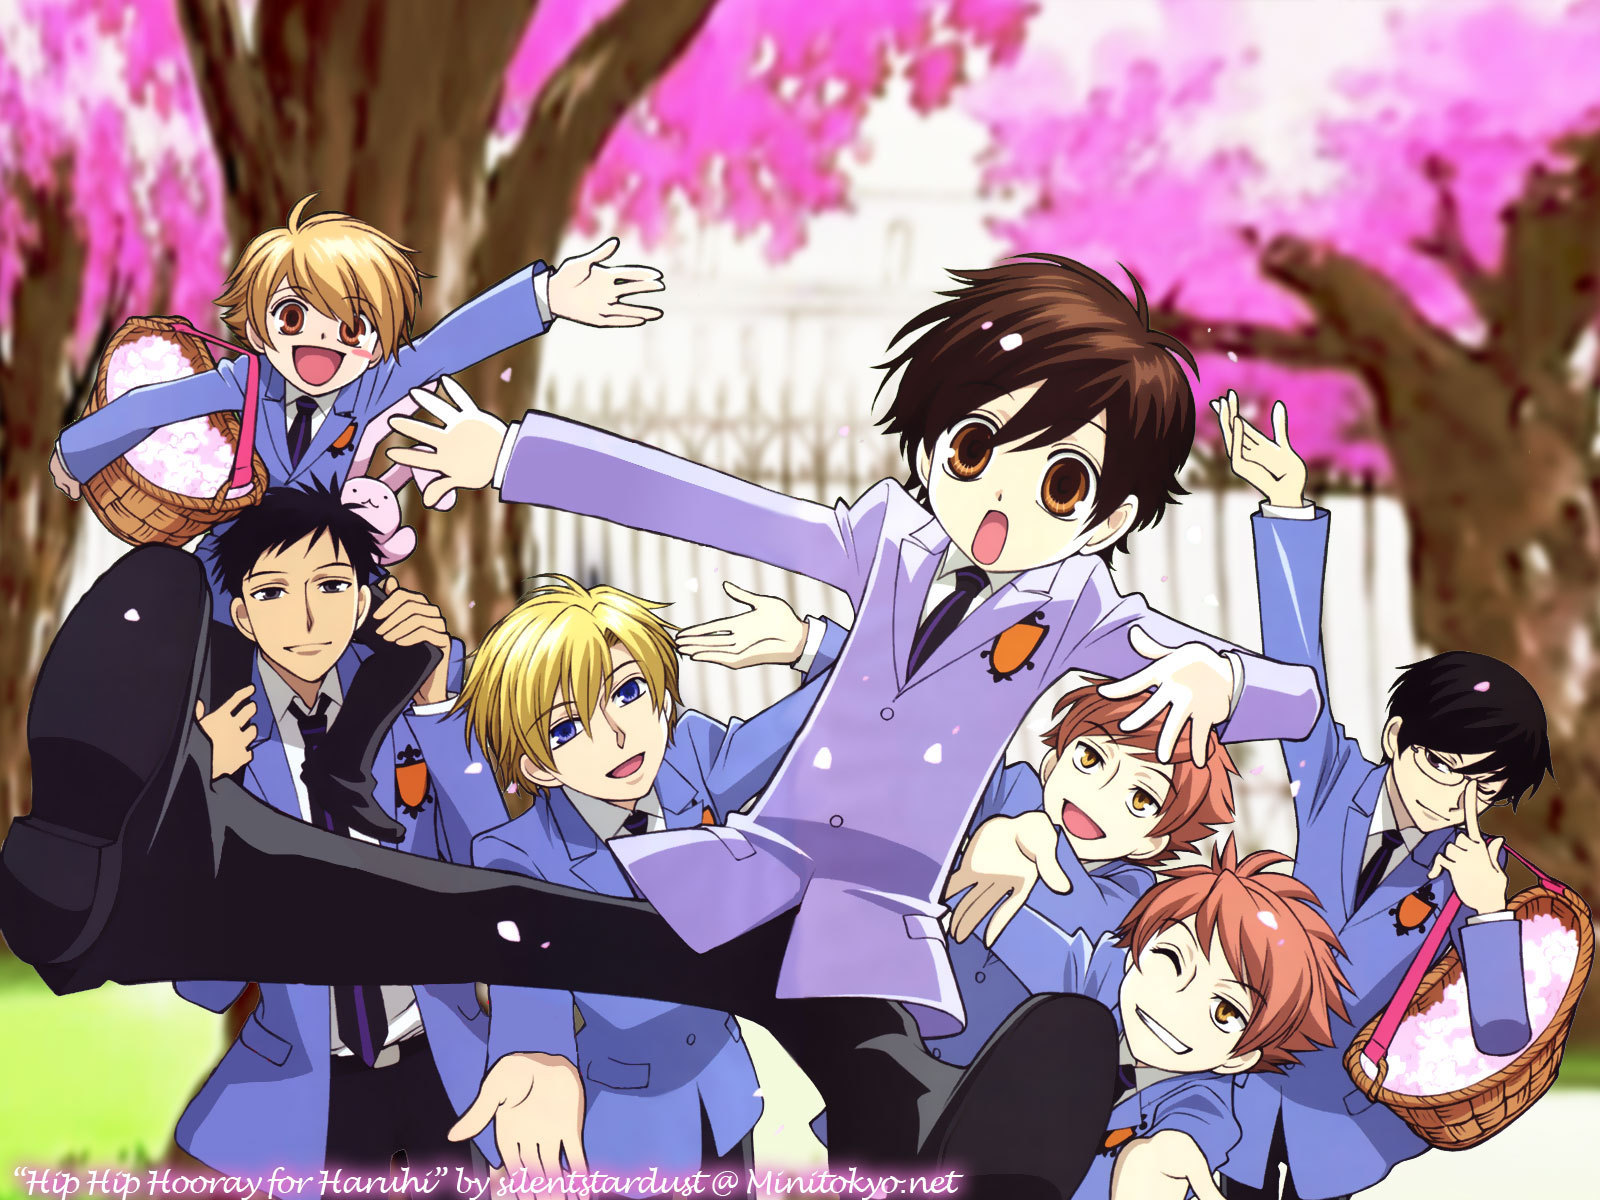 Ouran High School Host Club - Wallpaper and Scan Gallery - Minitokyo